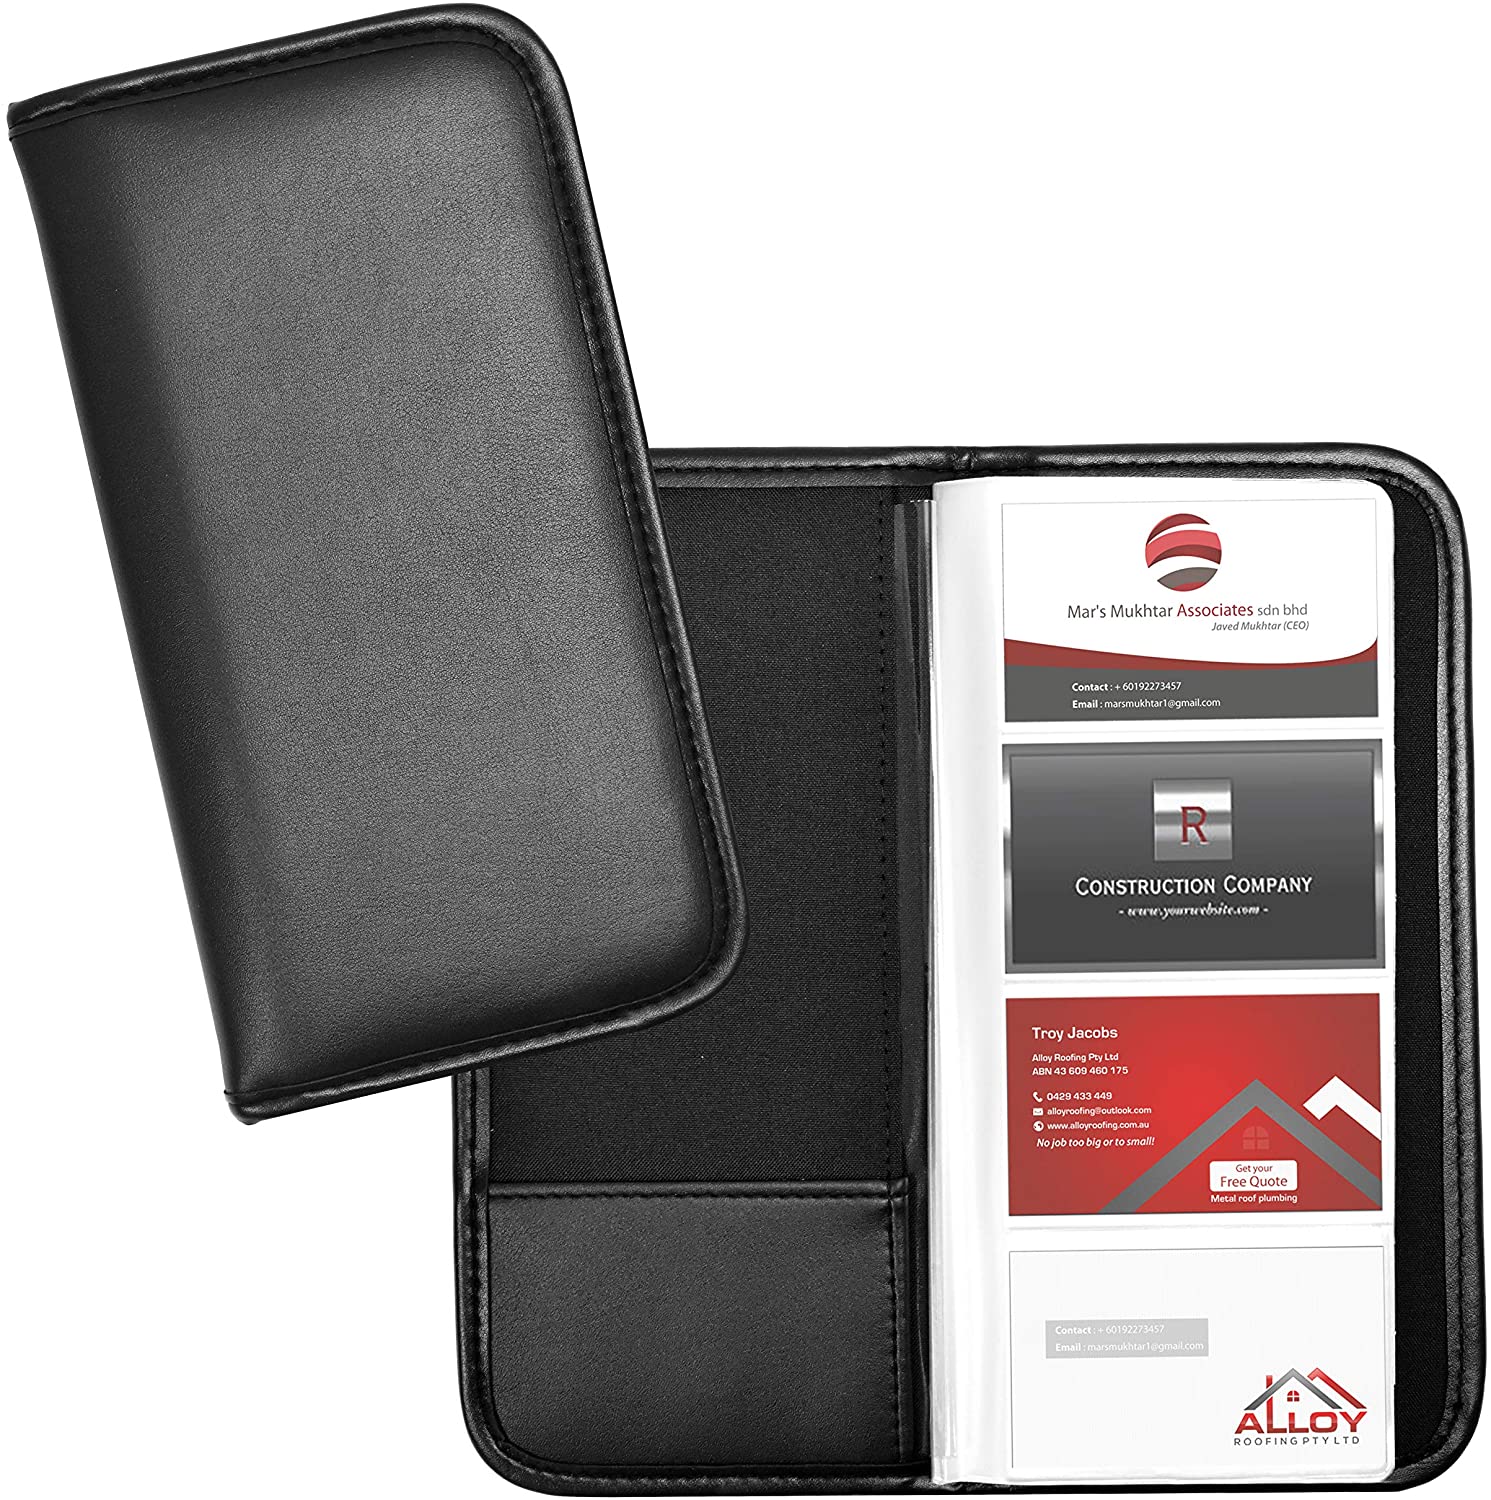 Professional Business Card Organizer with Black Padded PU Leather Cover - Holds 160 Business Cards